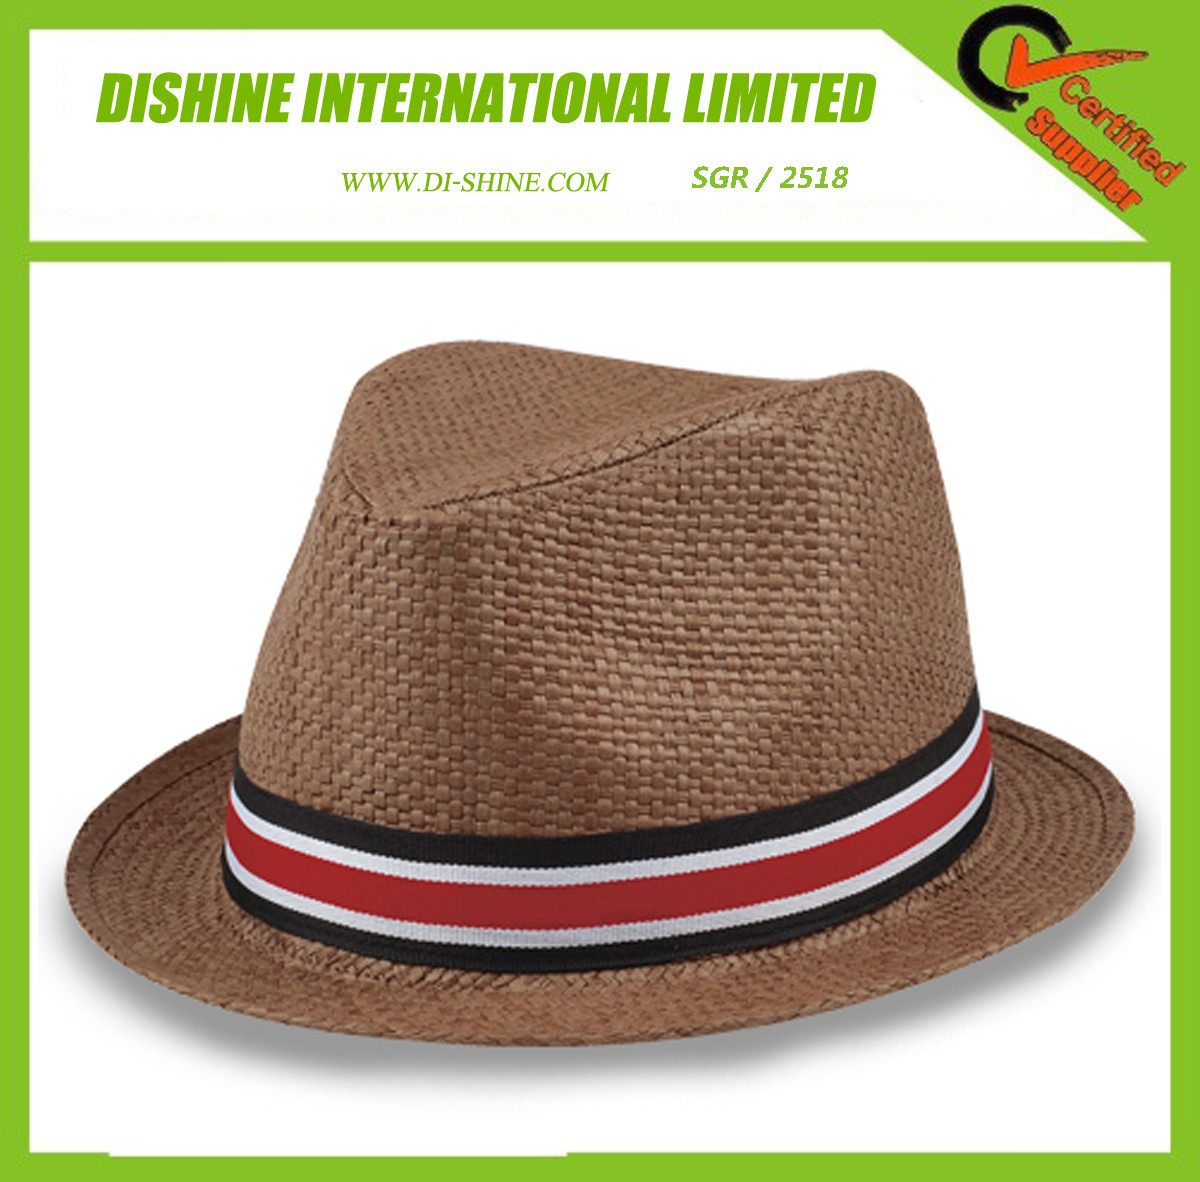 Quality Straw Hat for sale